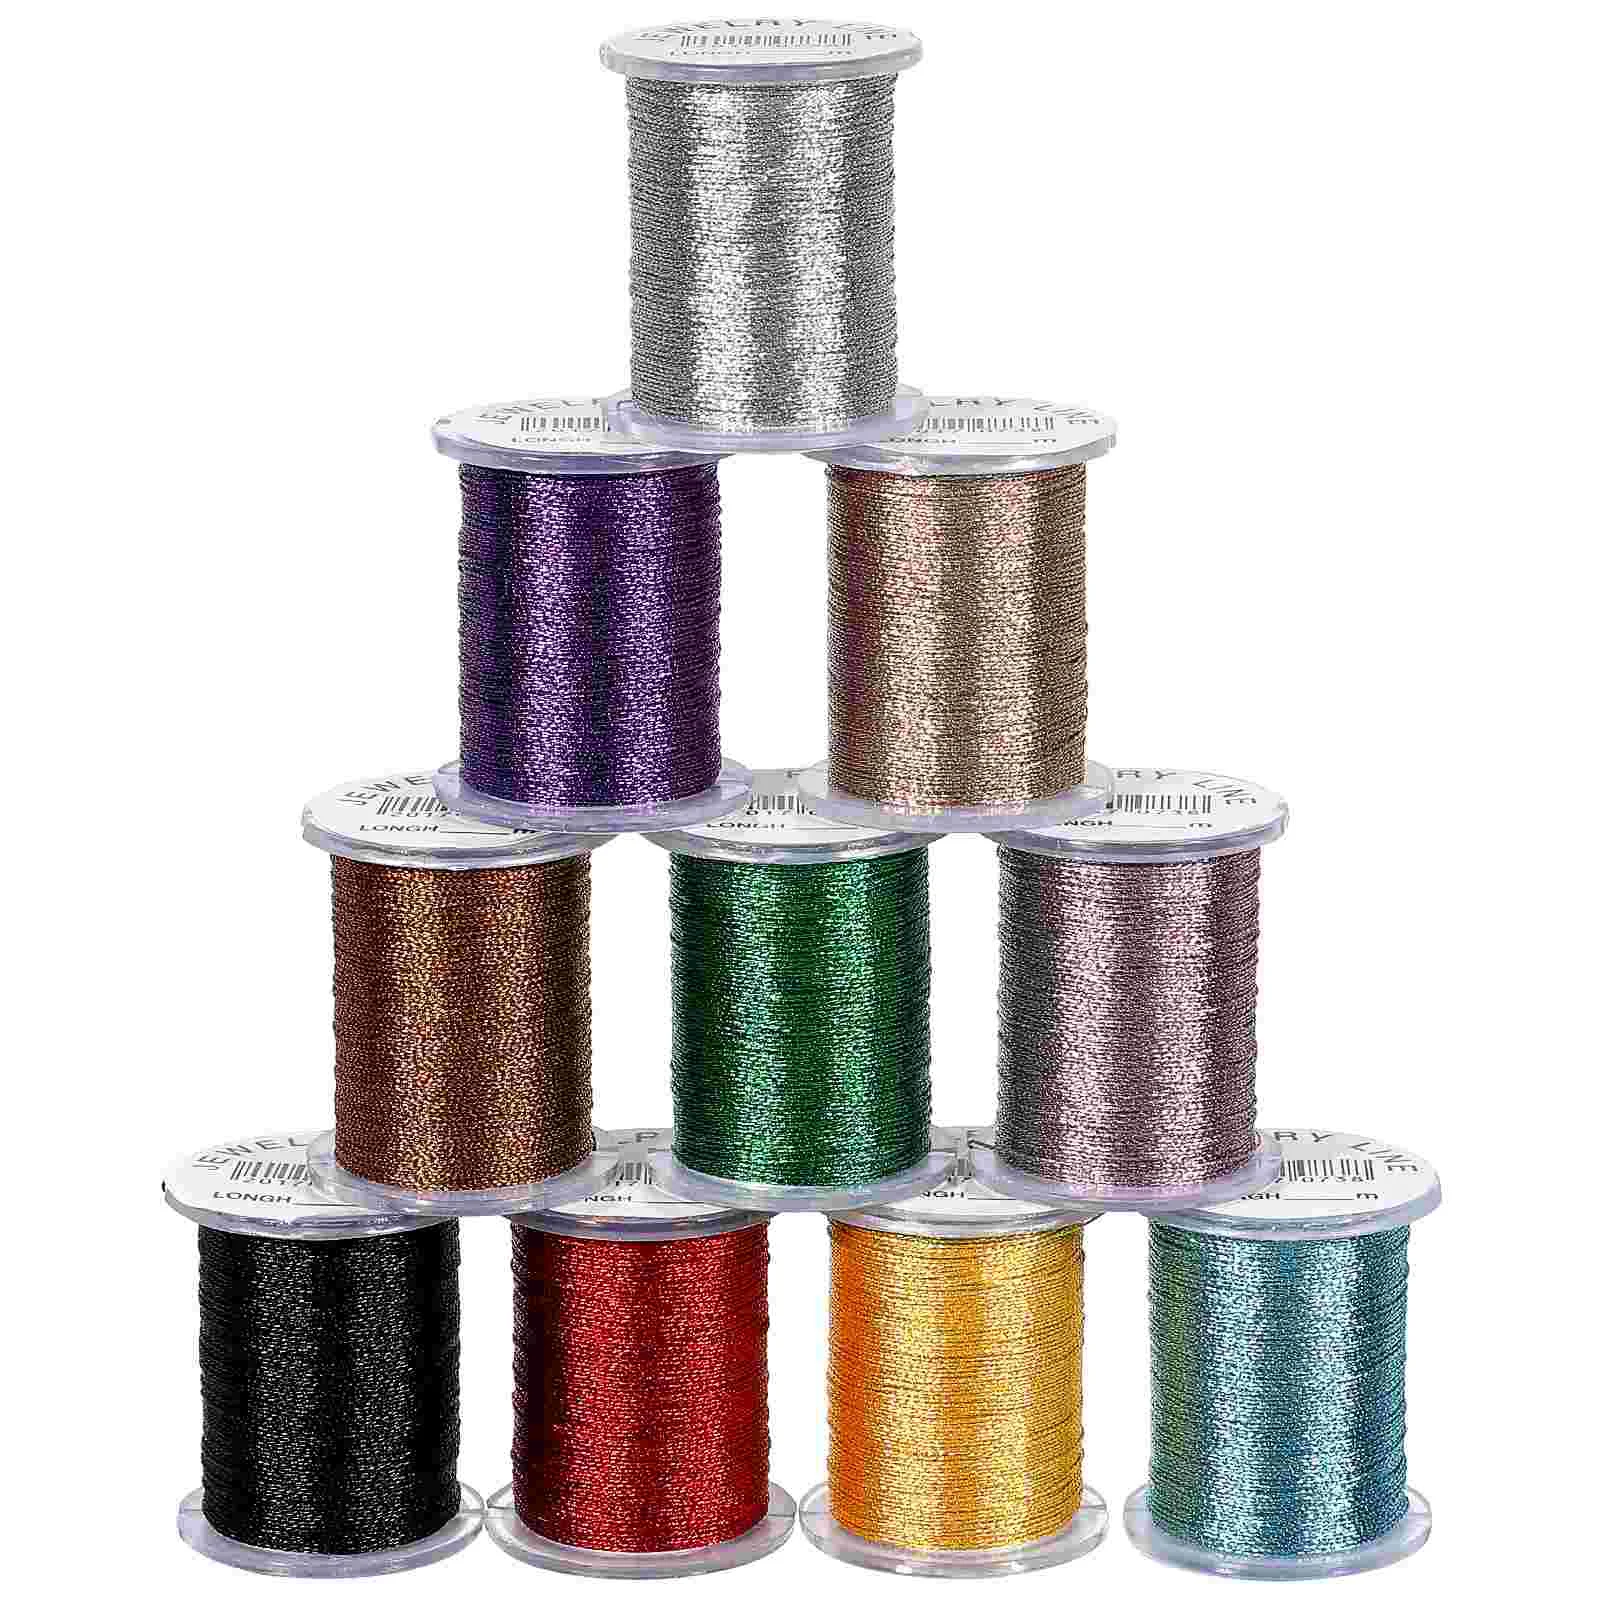 

Colorful Cotton Nylon Knot Cord Sewing Thread Jewelry Wire Crafting Beading Wire Knotting Sewing Cord Thread Macrame 0.3mm